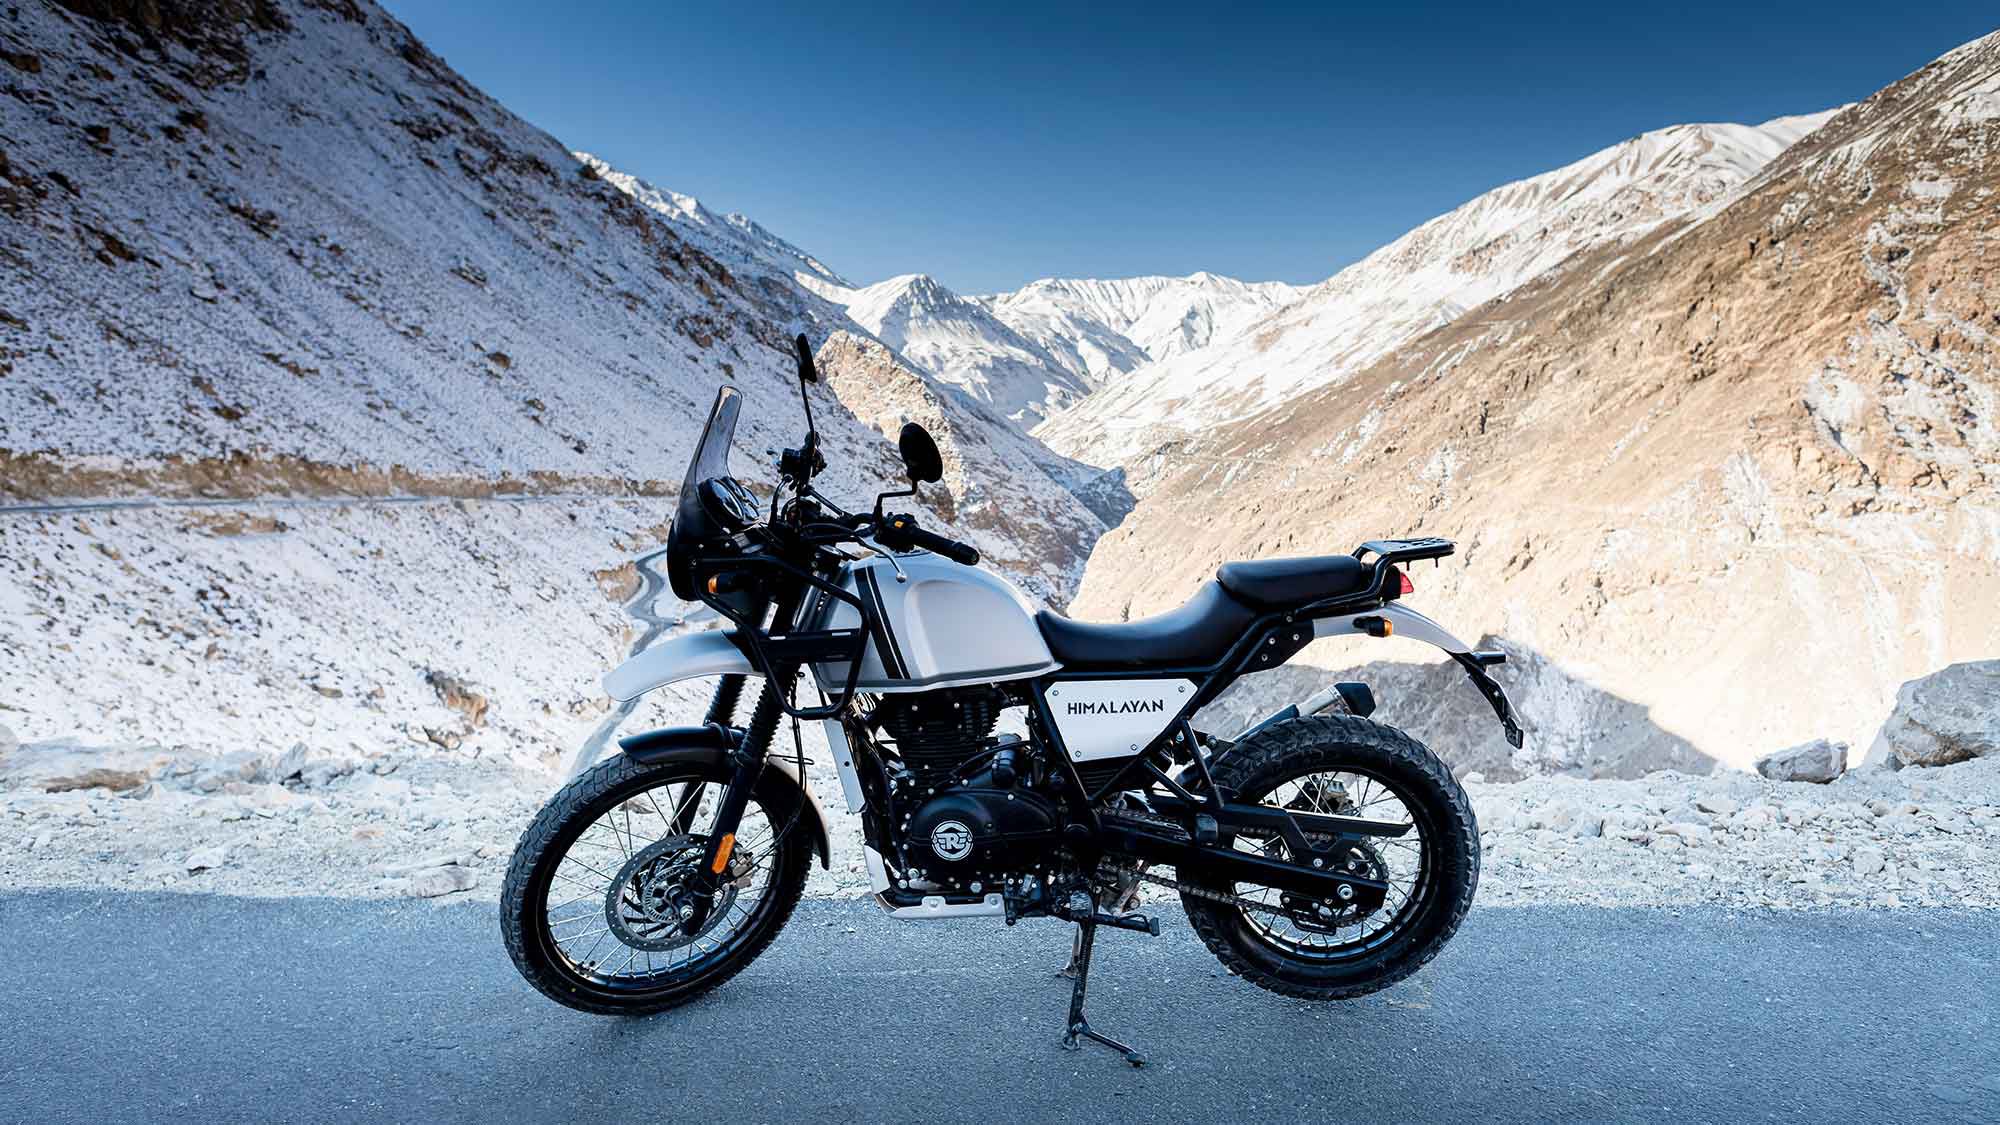 The 2022 Royal Enfield Himalayan in Mirage Silver colorway.